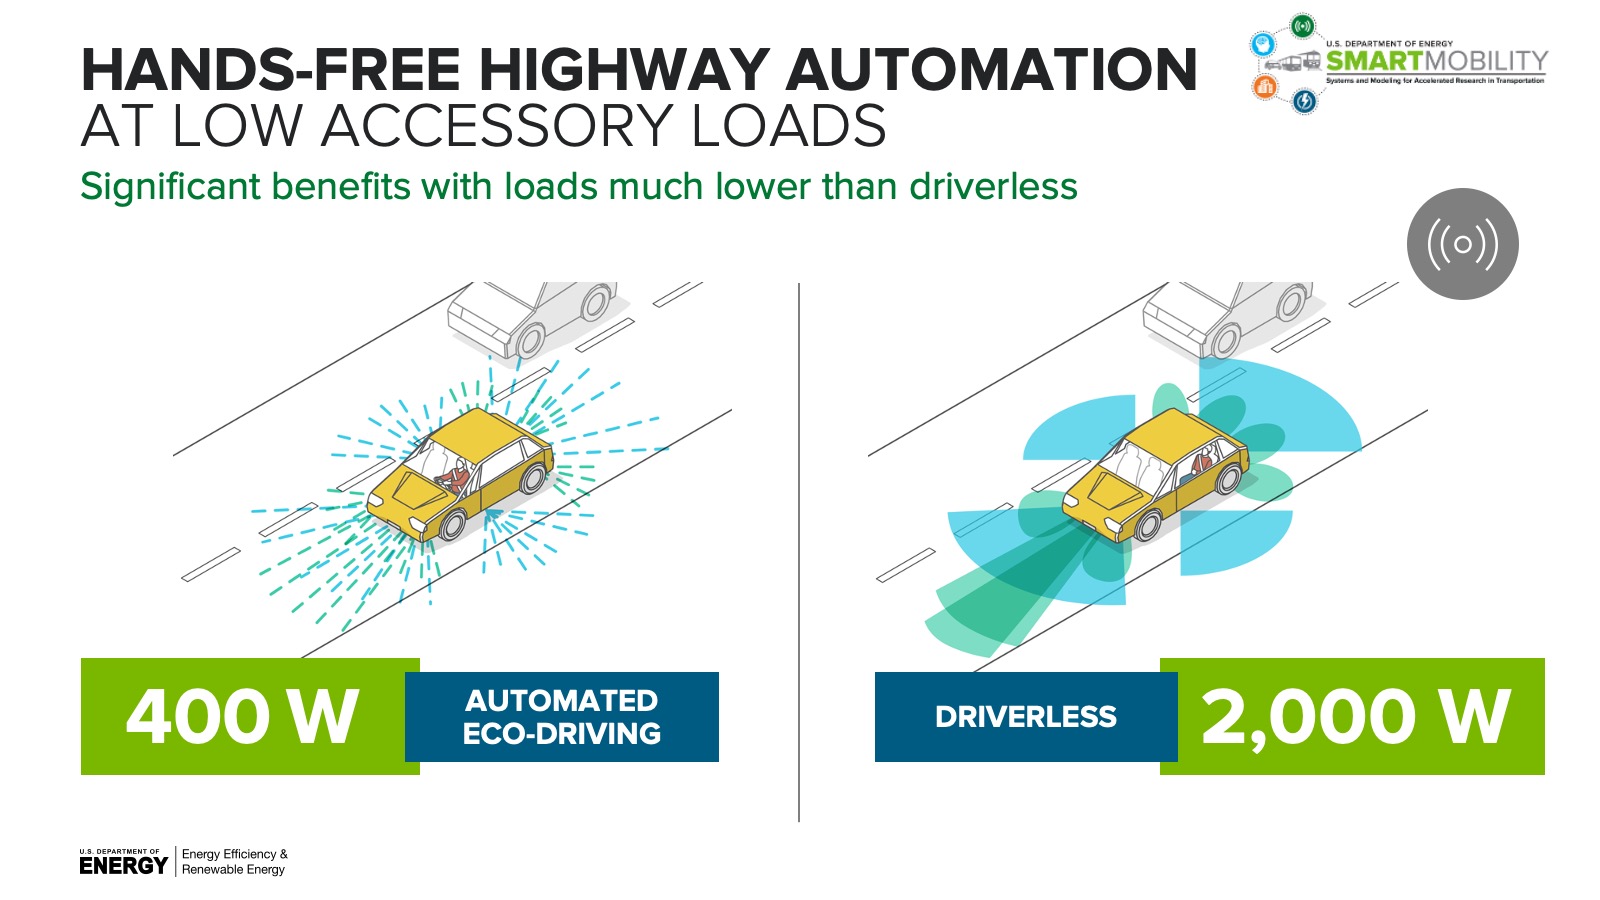 Hands-free highway automation at low accessory loads